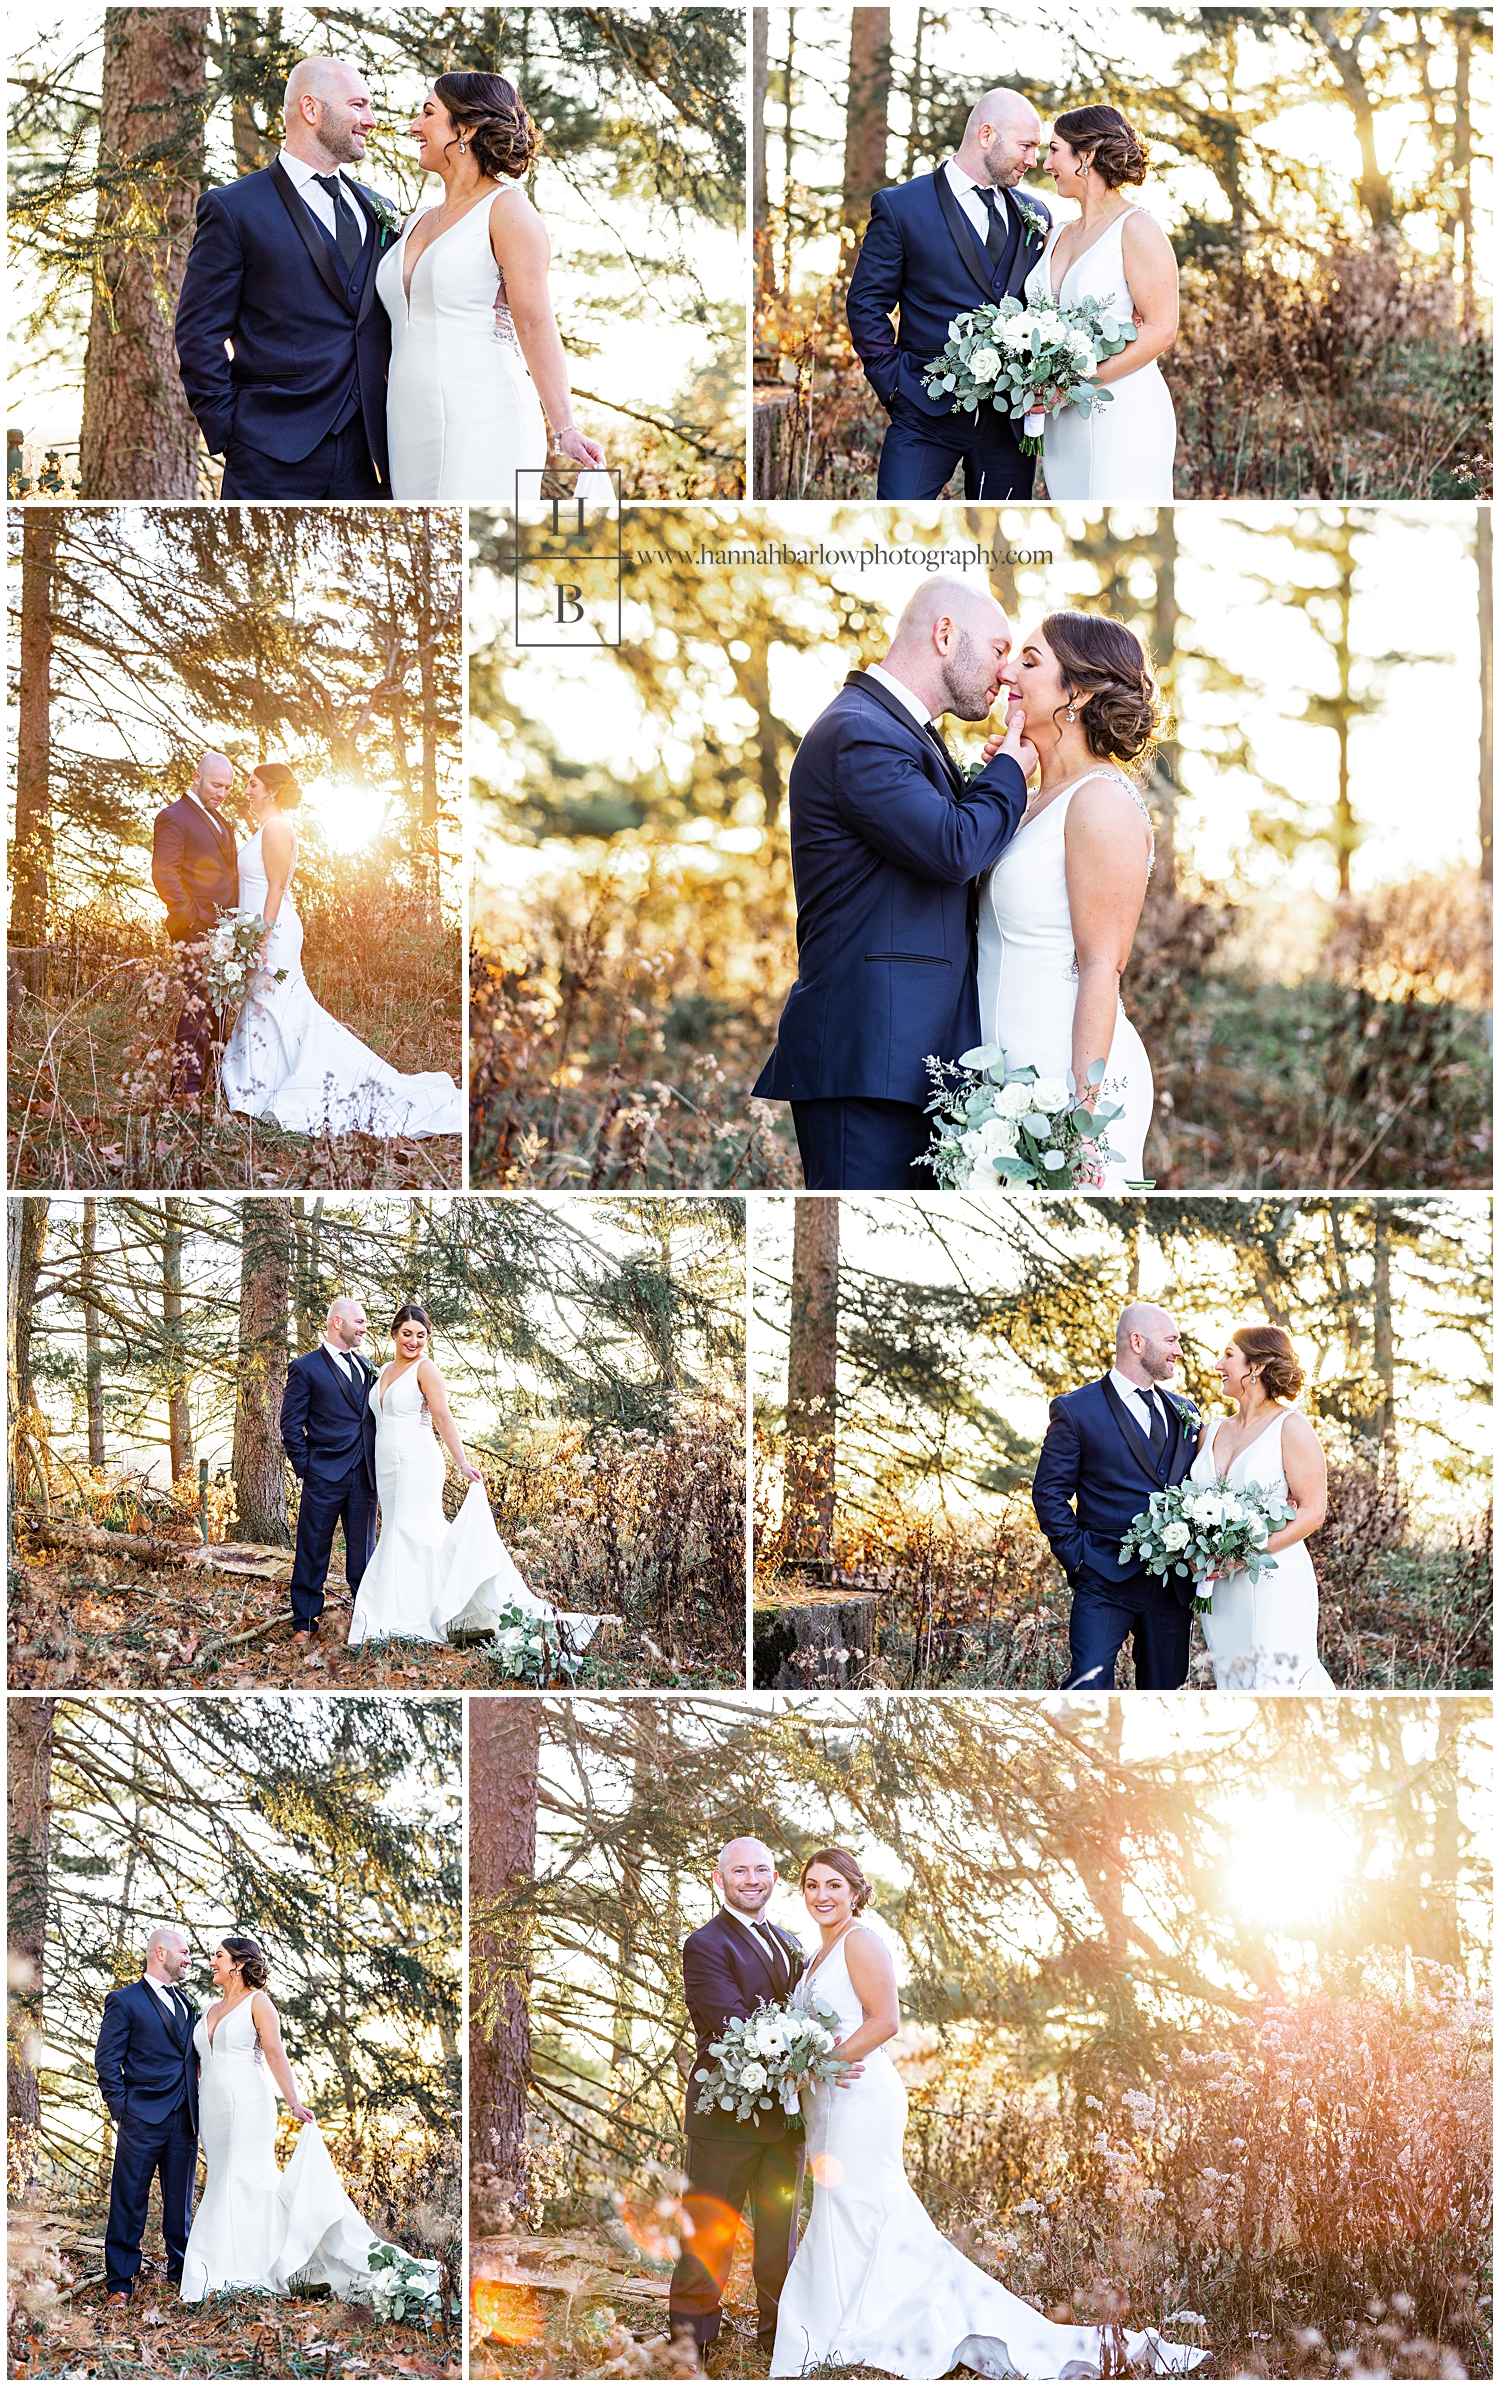 Groom in navy tux embraces wife for wedding photos with warm sunlight behind.